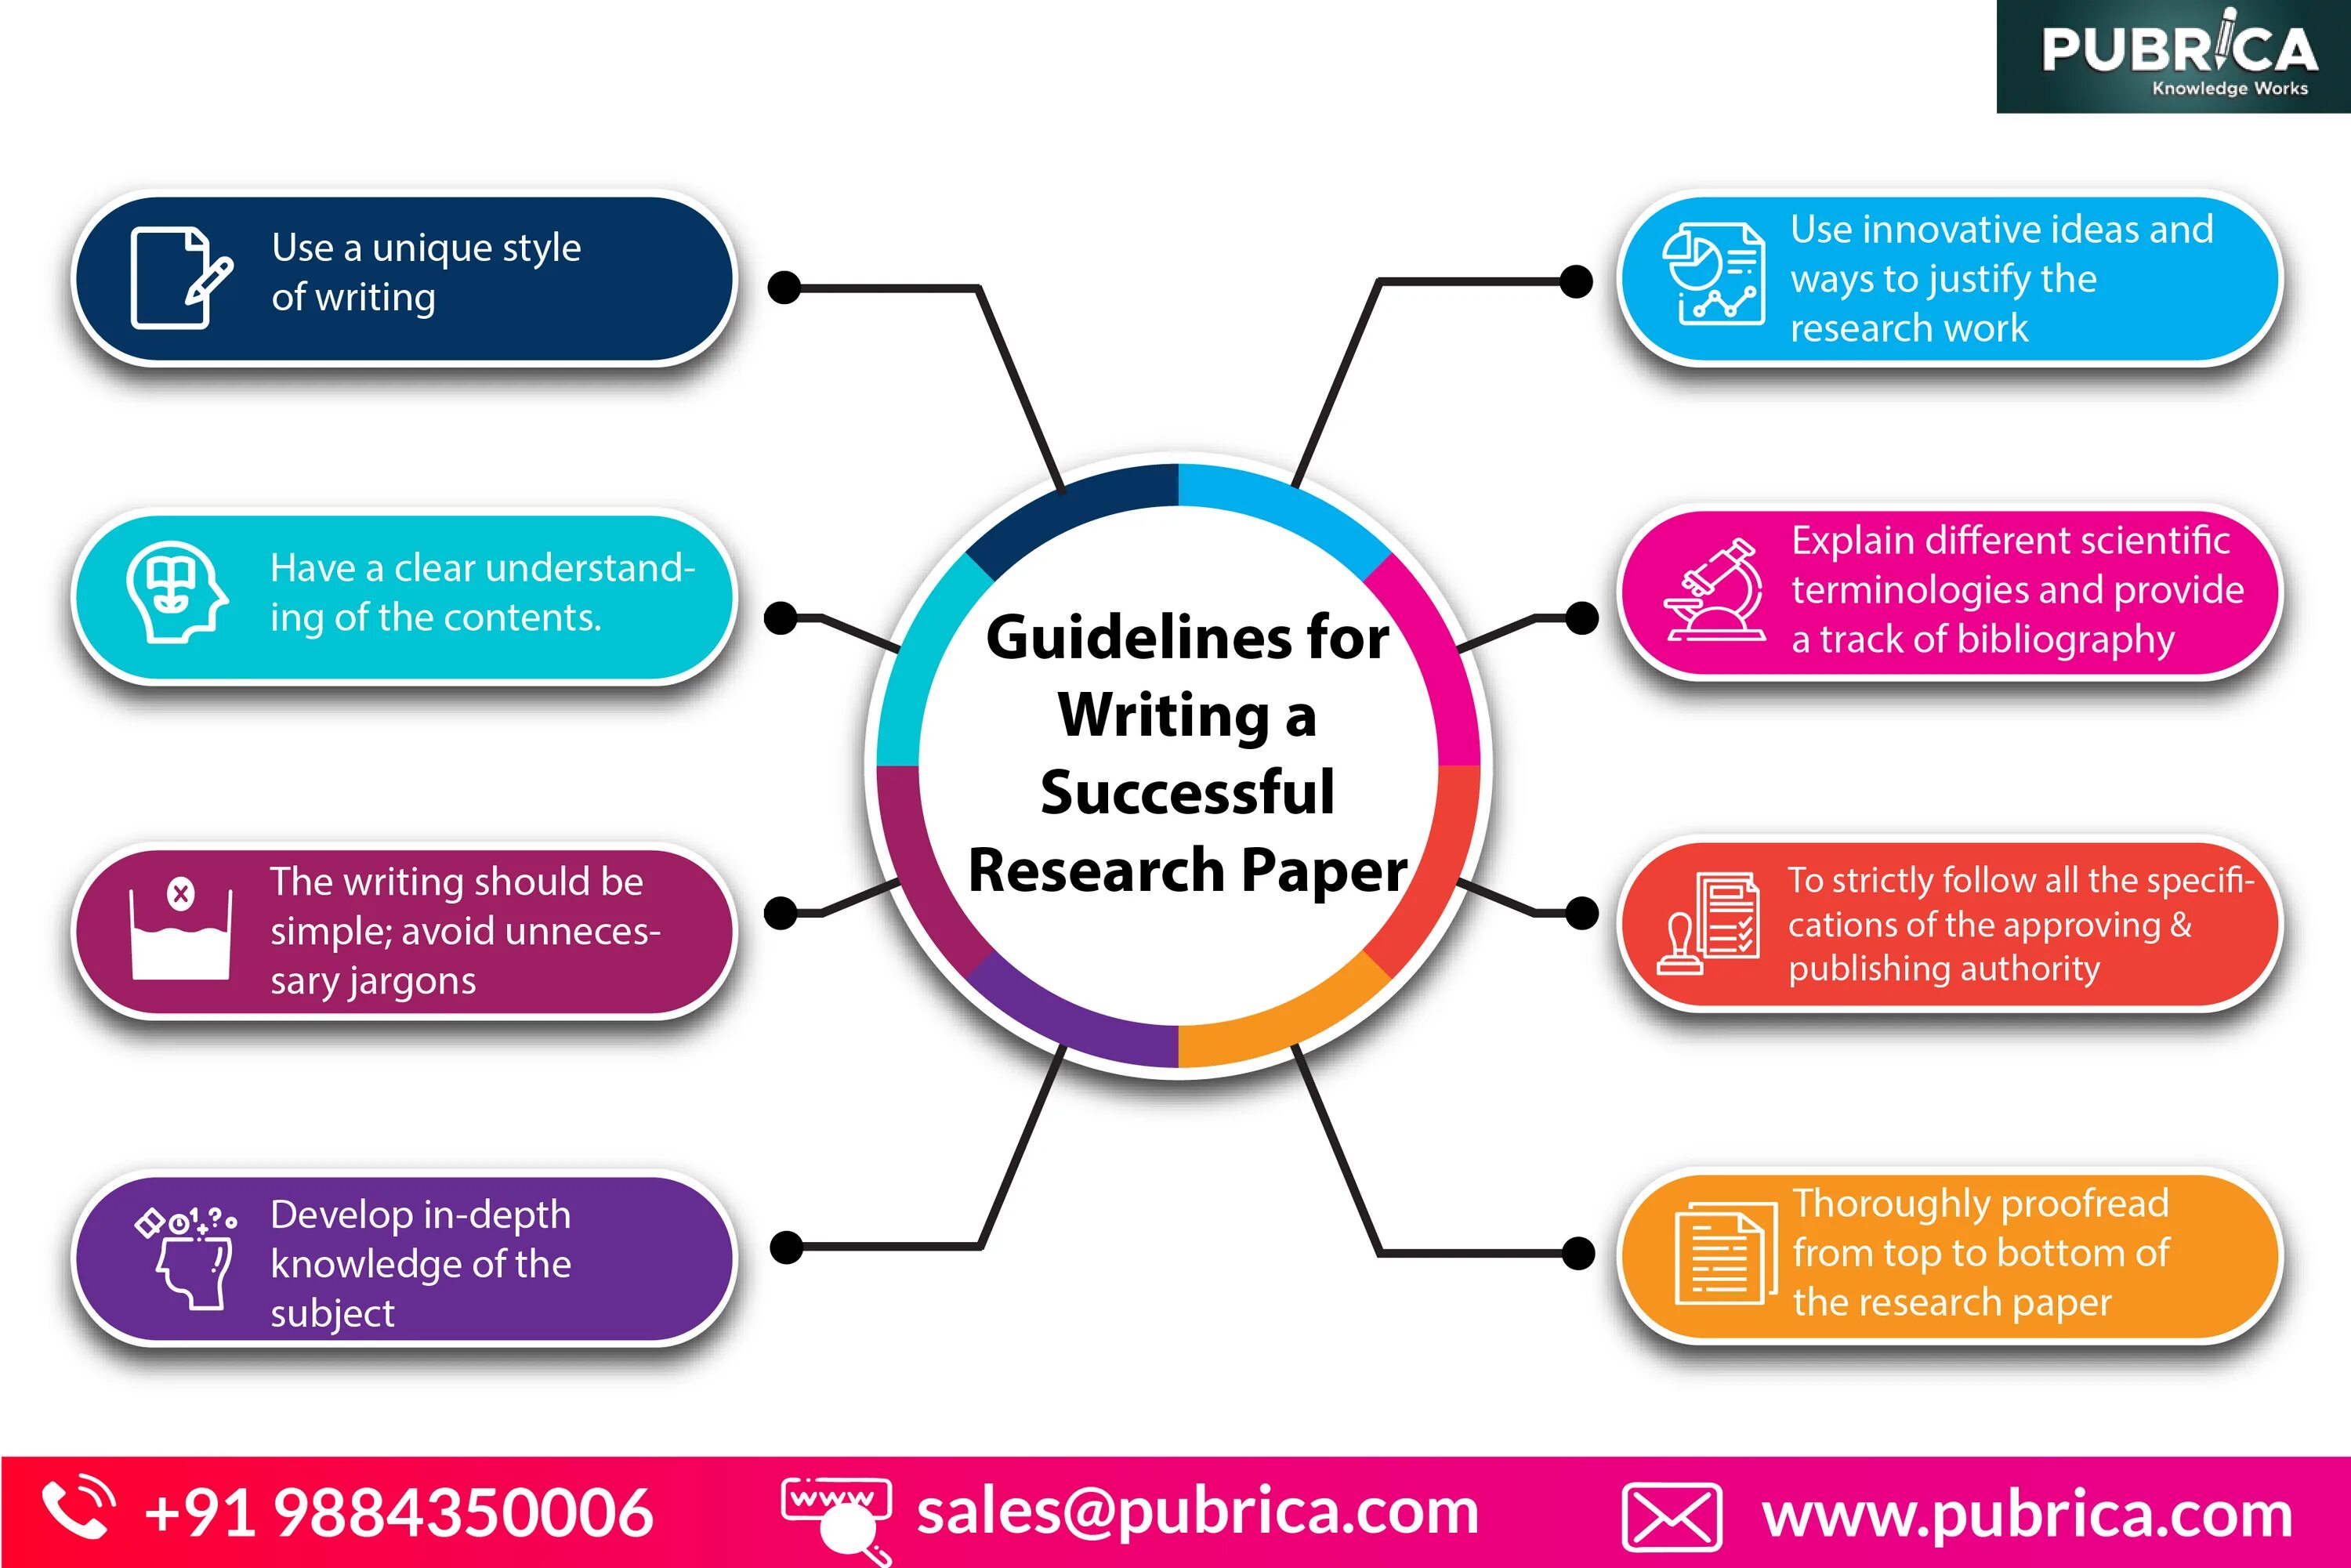 How to write a research paper. How to write research. Writing research papers. Types of Scientific research. Guidelines content